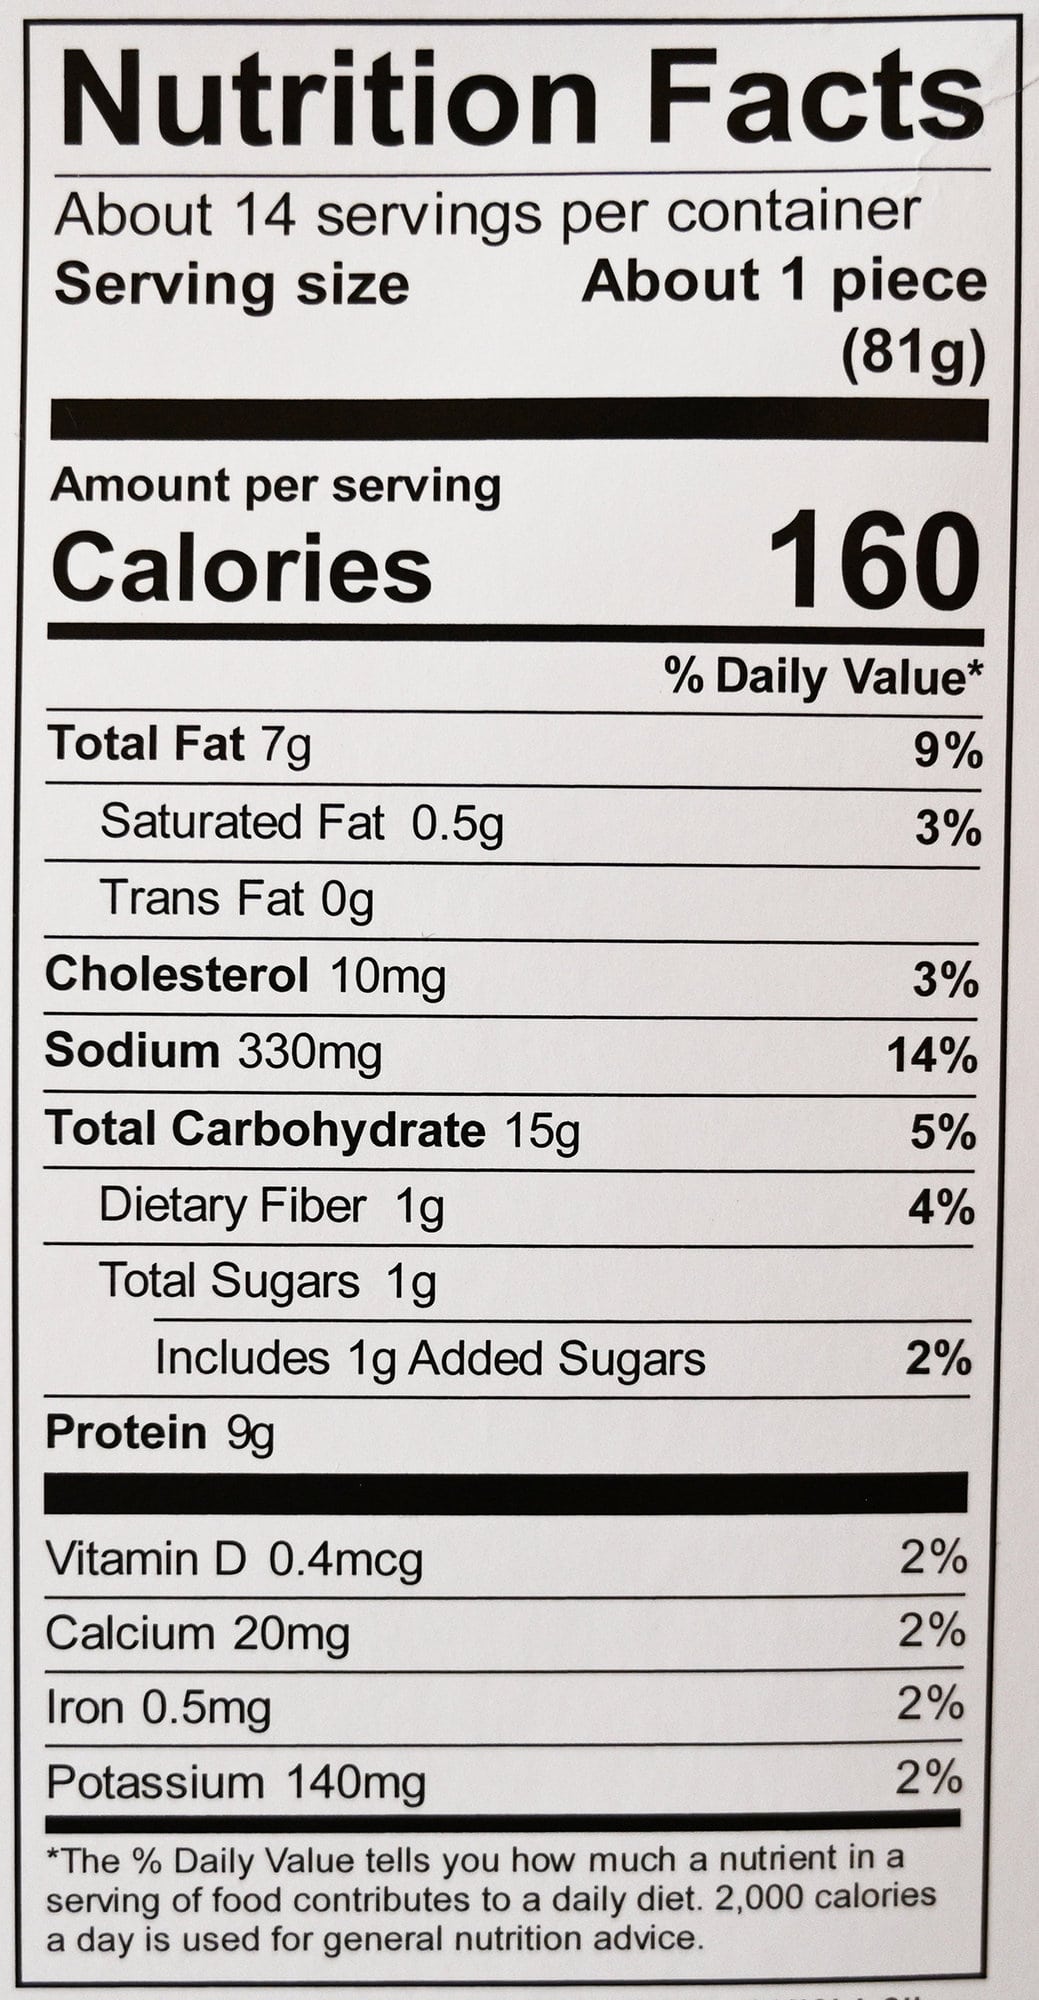 Image of the nutrition facts for the cod from the box.